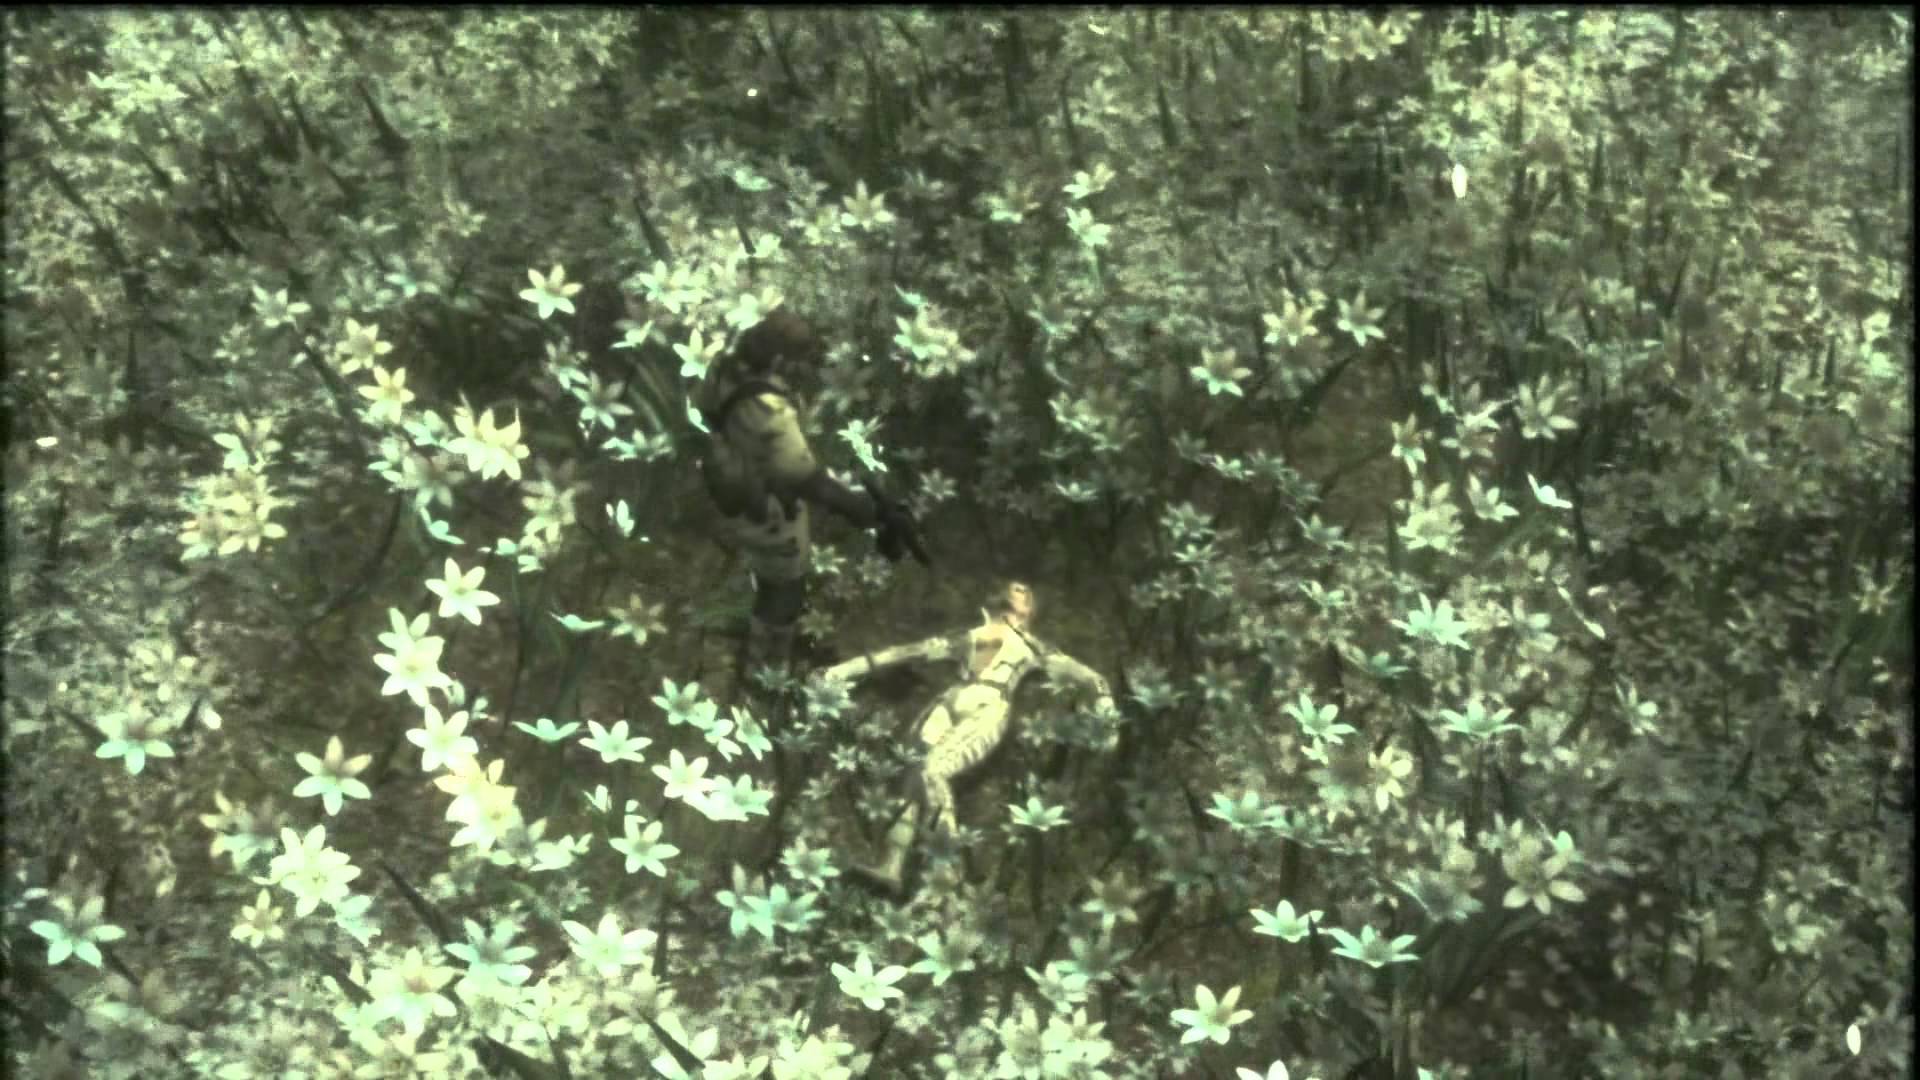 Metal Gear Solid 3 HD Snake vs The Boss fight and cutscene - YouTube